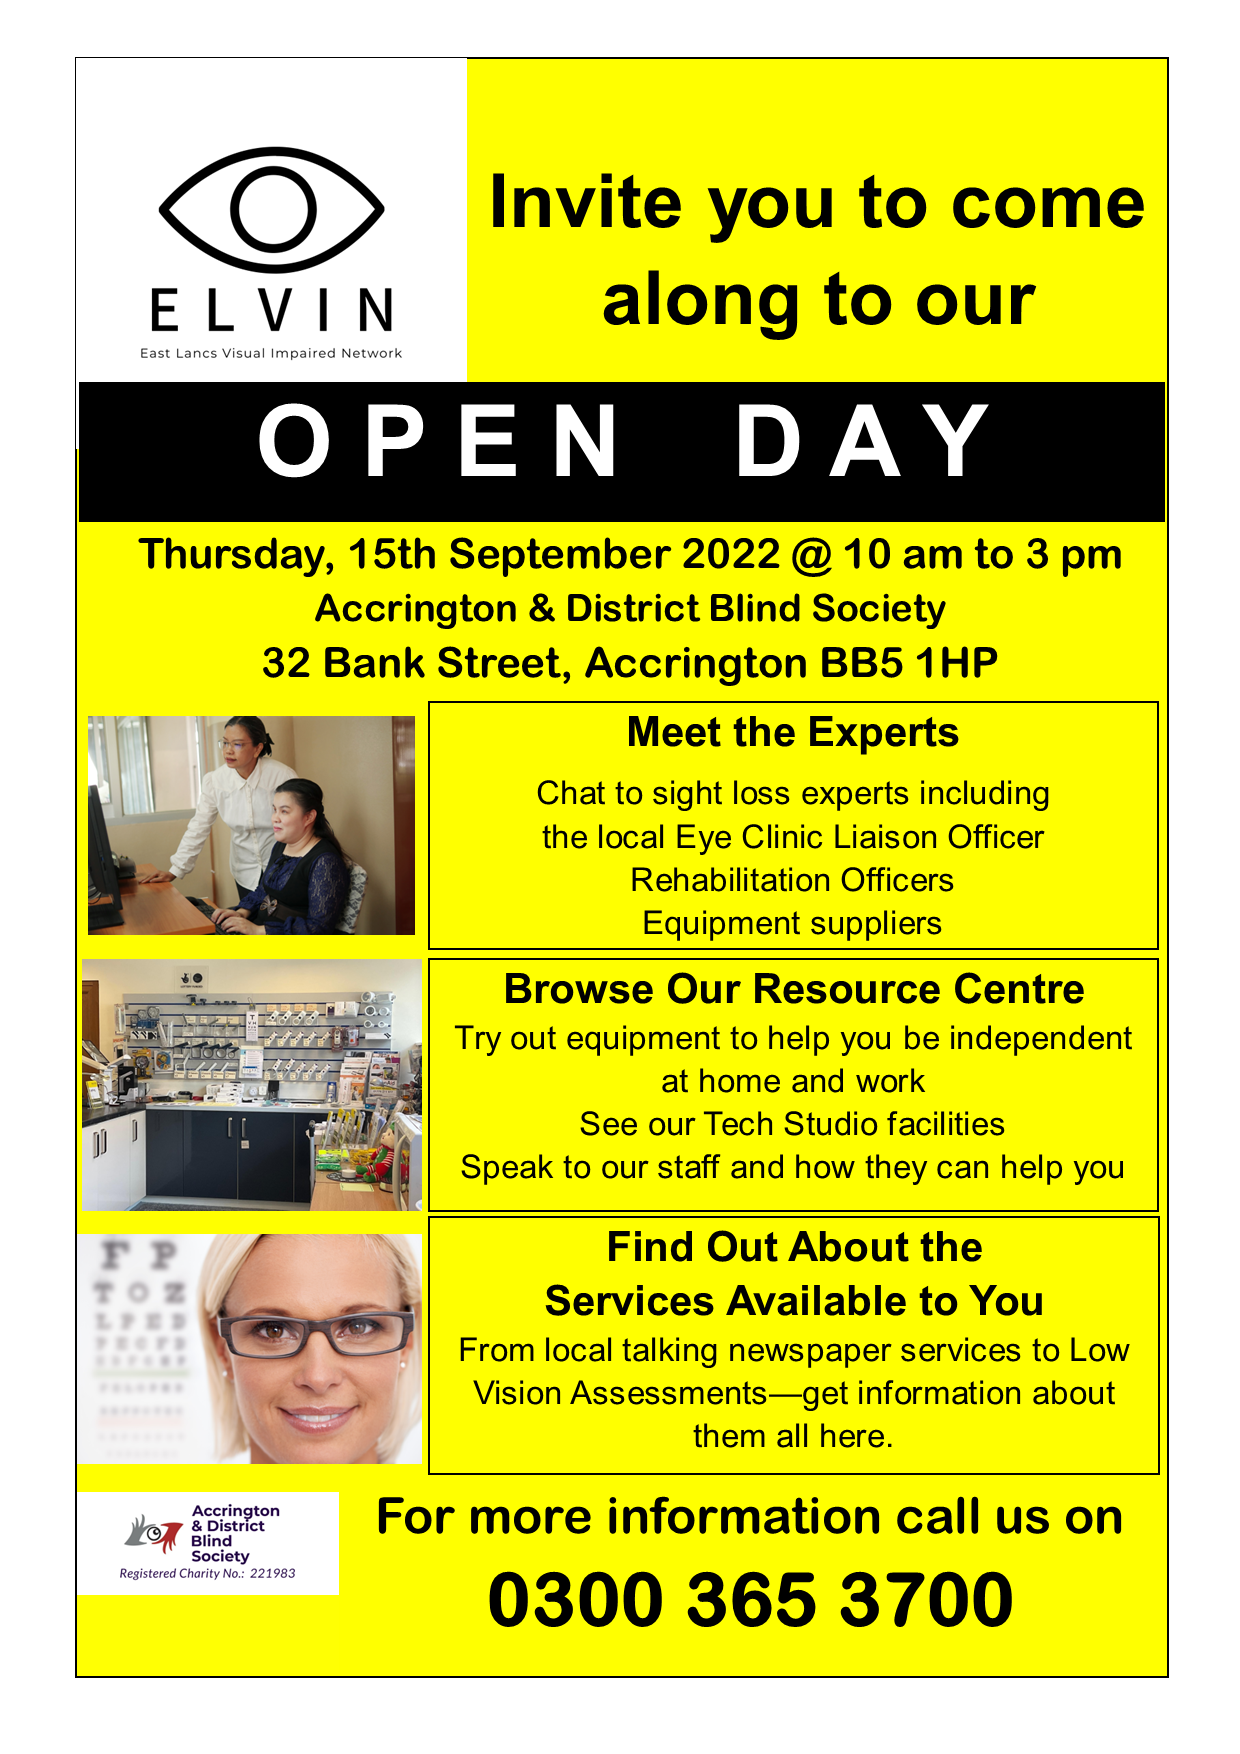 A picture of ELVIN Open Day